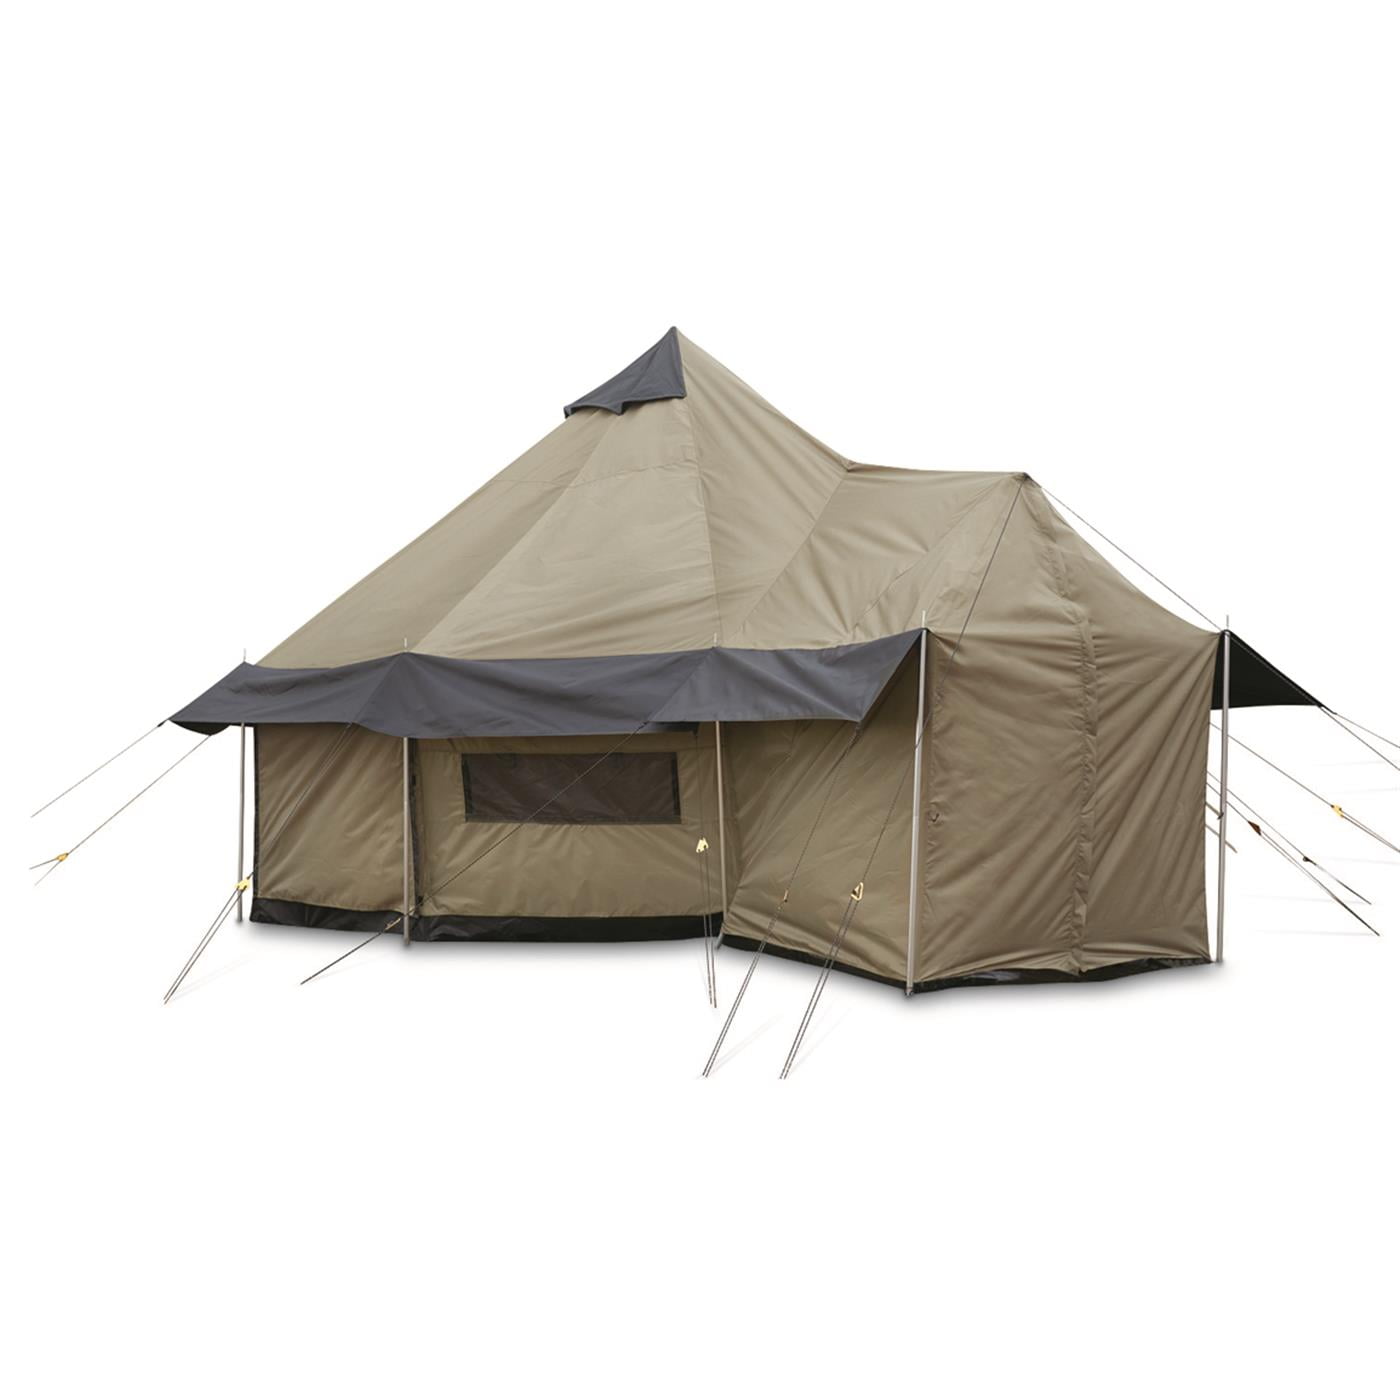 Why Have A Tent Stove?, Tent Stove Guide